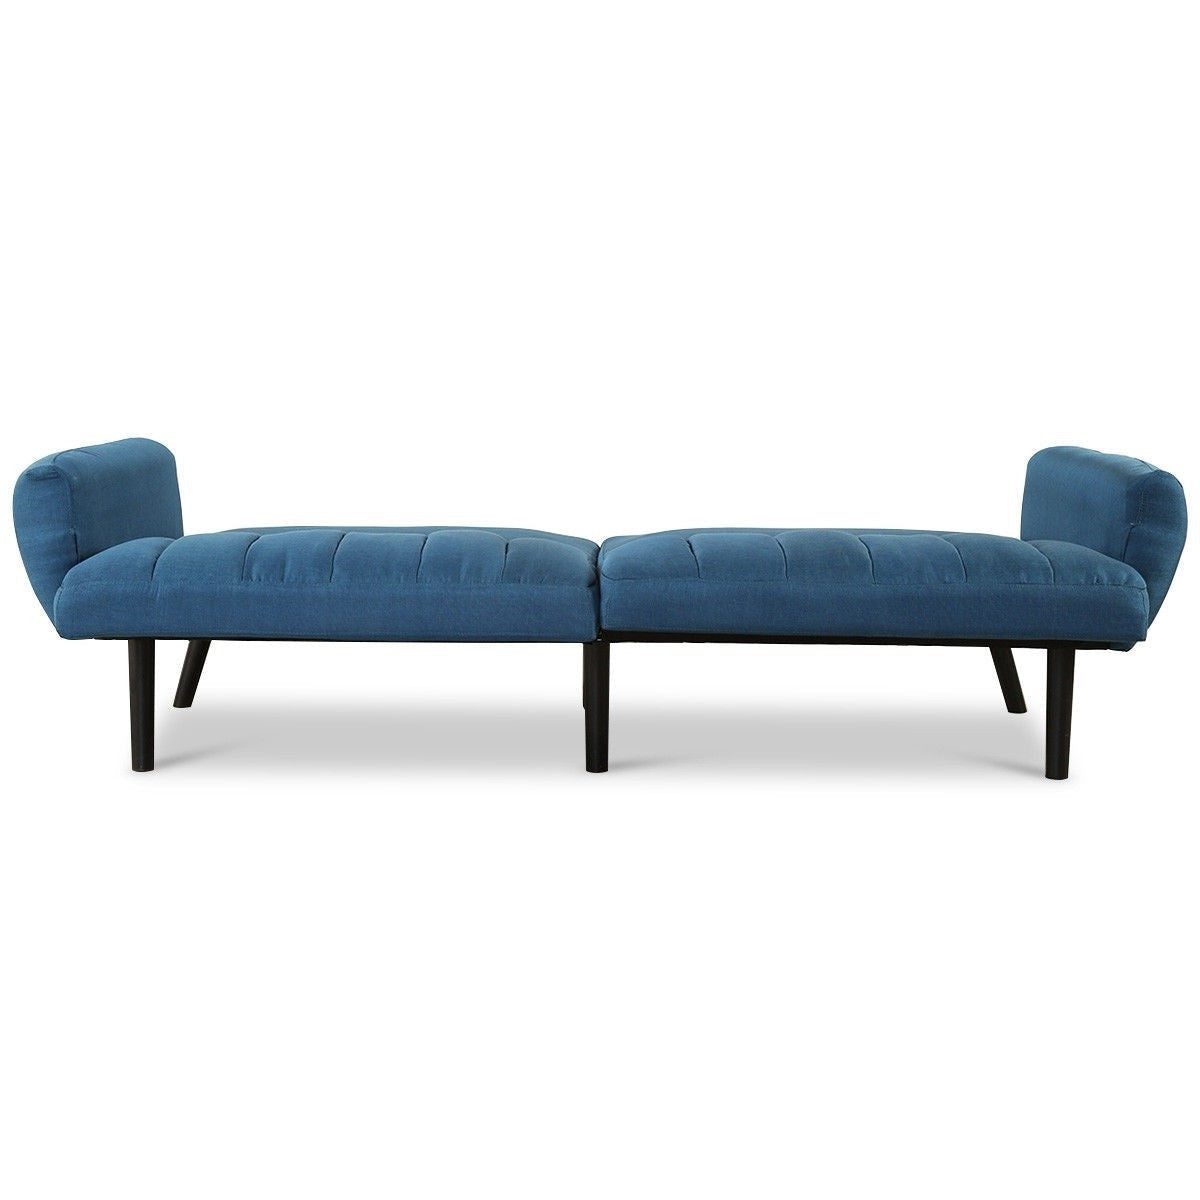 Living Room > Sofas - Modern Mid-Century Navy Blue Linen Futon Sofa Bed Couch